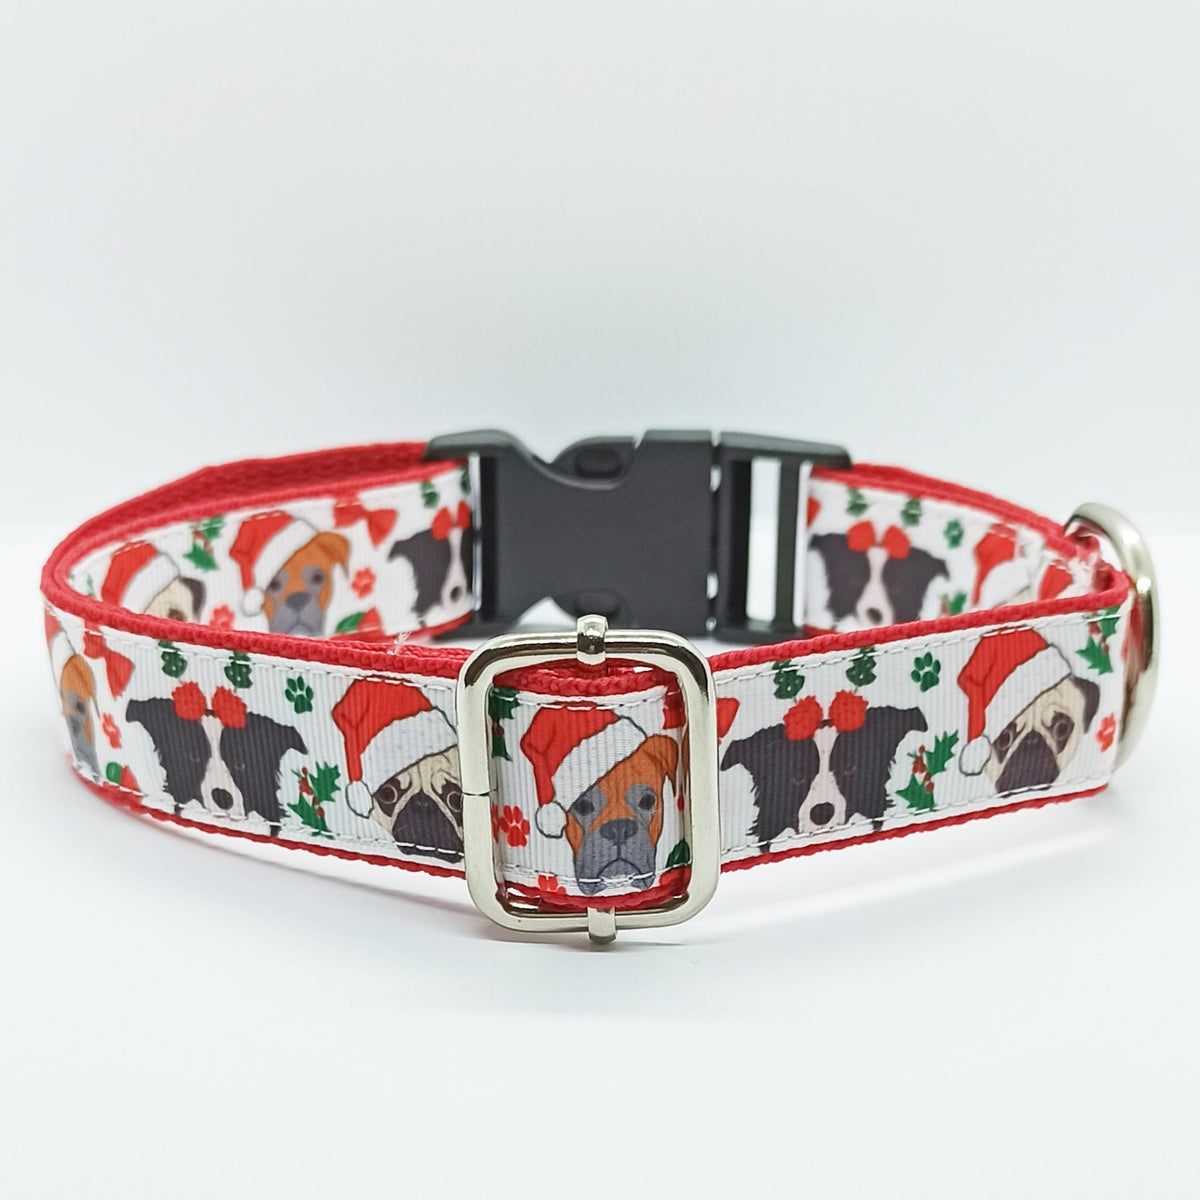 Winter Dogs Dog Breeds Christmas Dog Collar - S-L sizes with custom matching pet tag - Adventures of Rubi